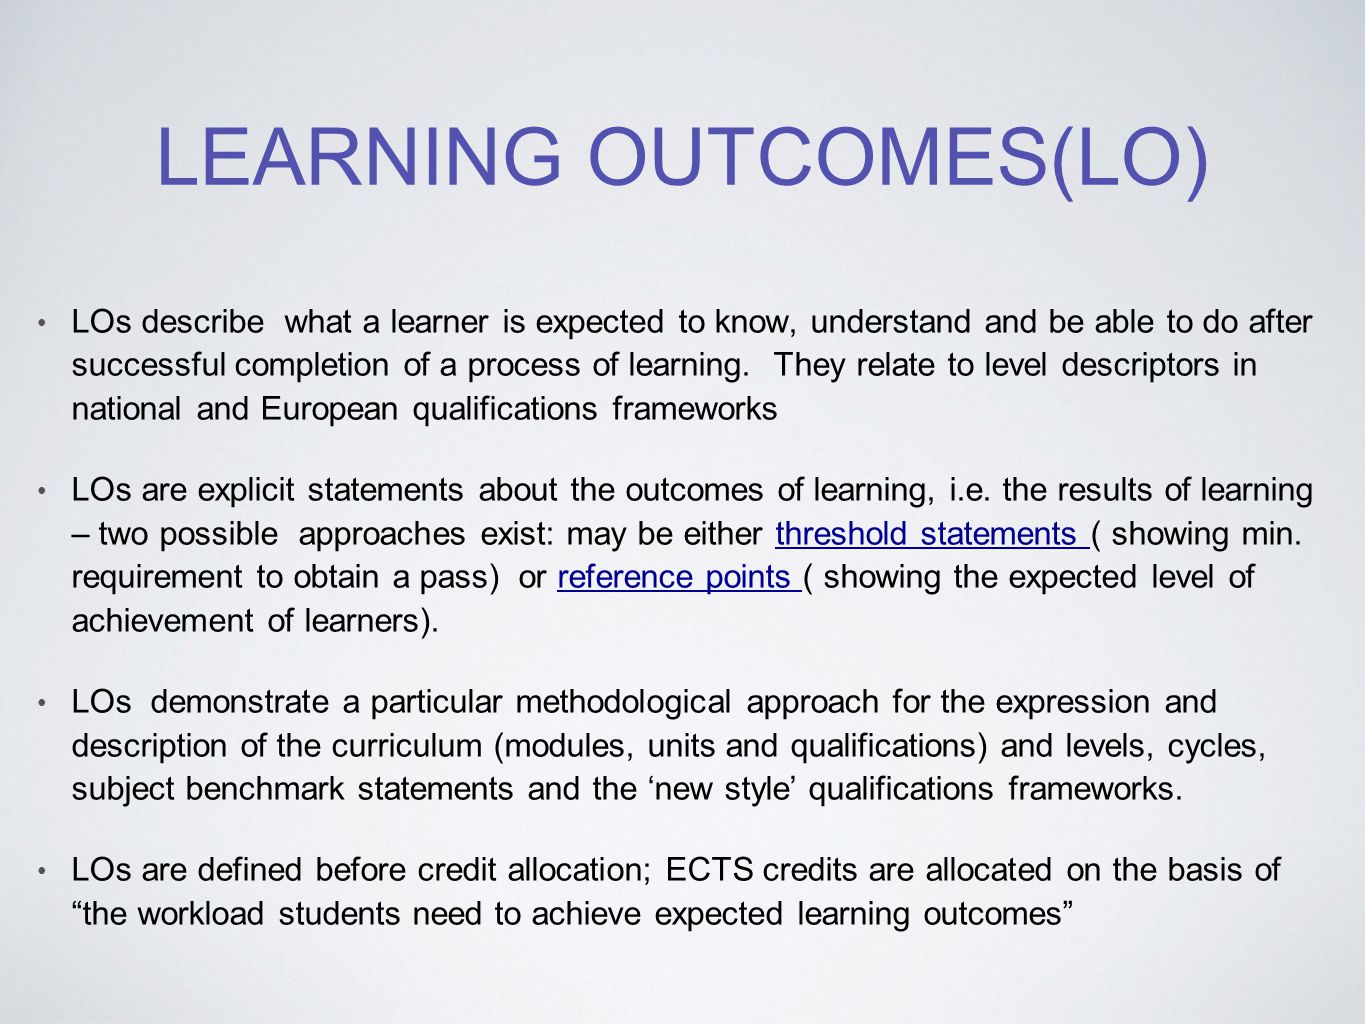 LEARNING OUTCOMES(LO) LOs describe what a learner is expected to know, understand and be able to do after successful completion of a process of learning.